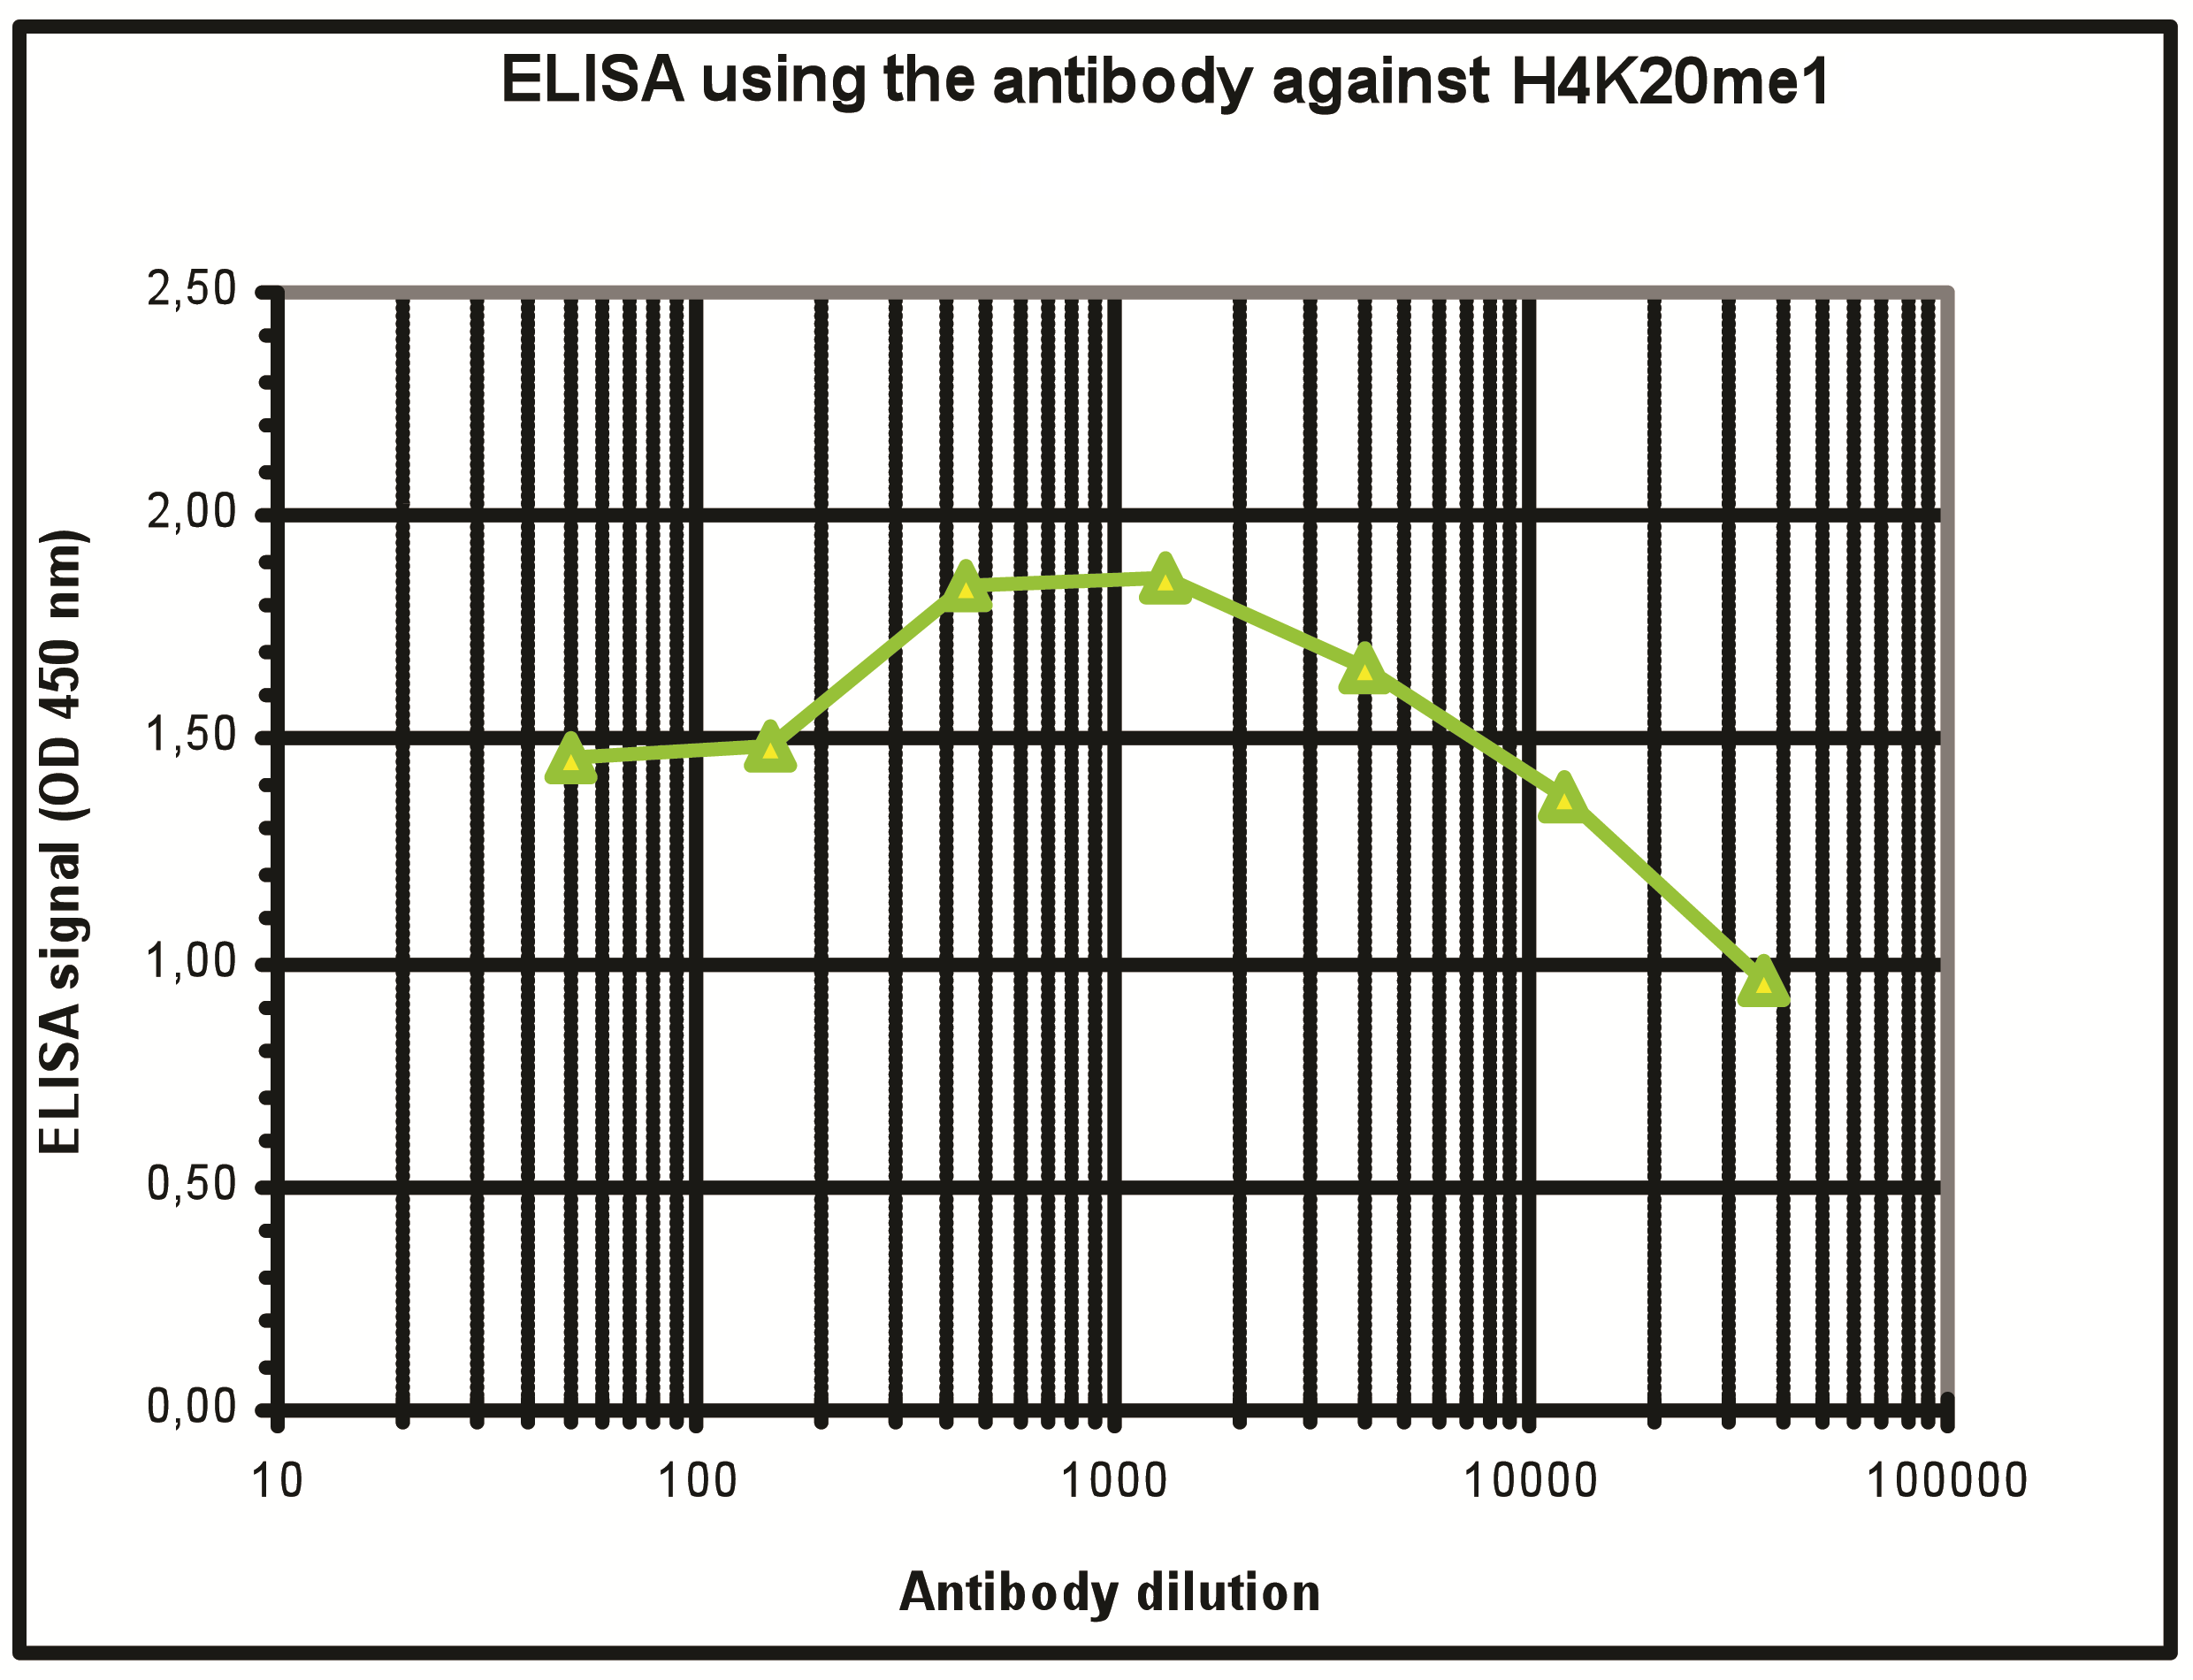 To determine the titer, an ELISA was performed using a serial dilution of the Bioss antibody directed against H4K20me1 (cat. No. bs-53104R) in antigen-coated wells. The antigen used was a peptide containing the histone modification of interest. By plotting the absorbance against the antibody dilution, the titer of the antibody was estimated to be 1:51,100.